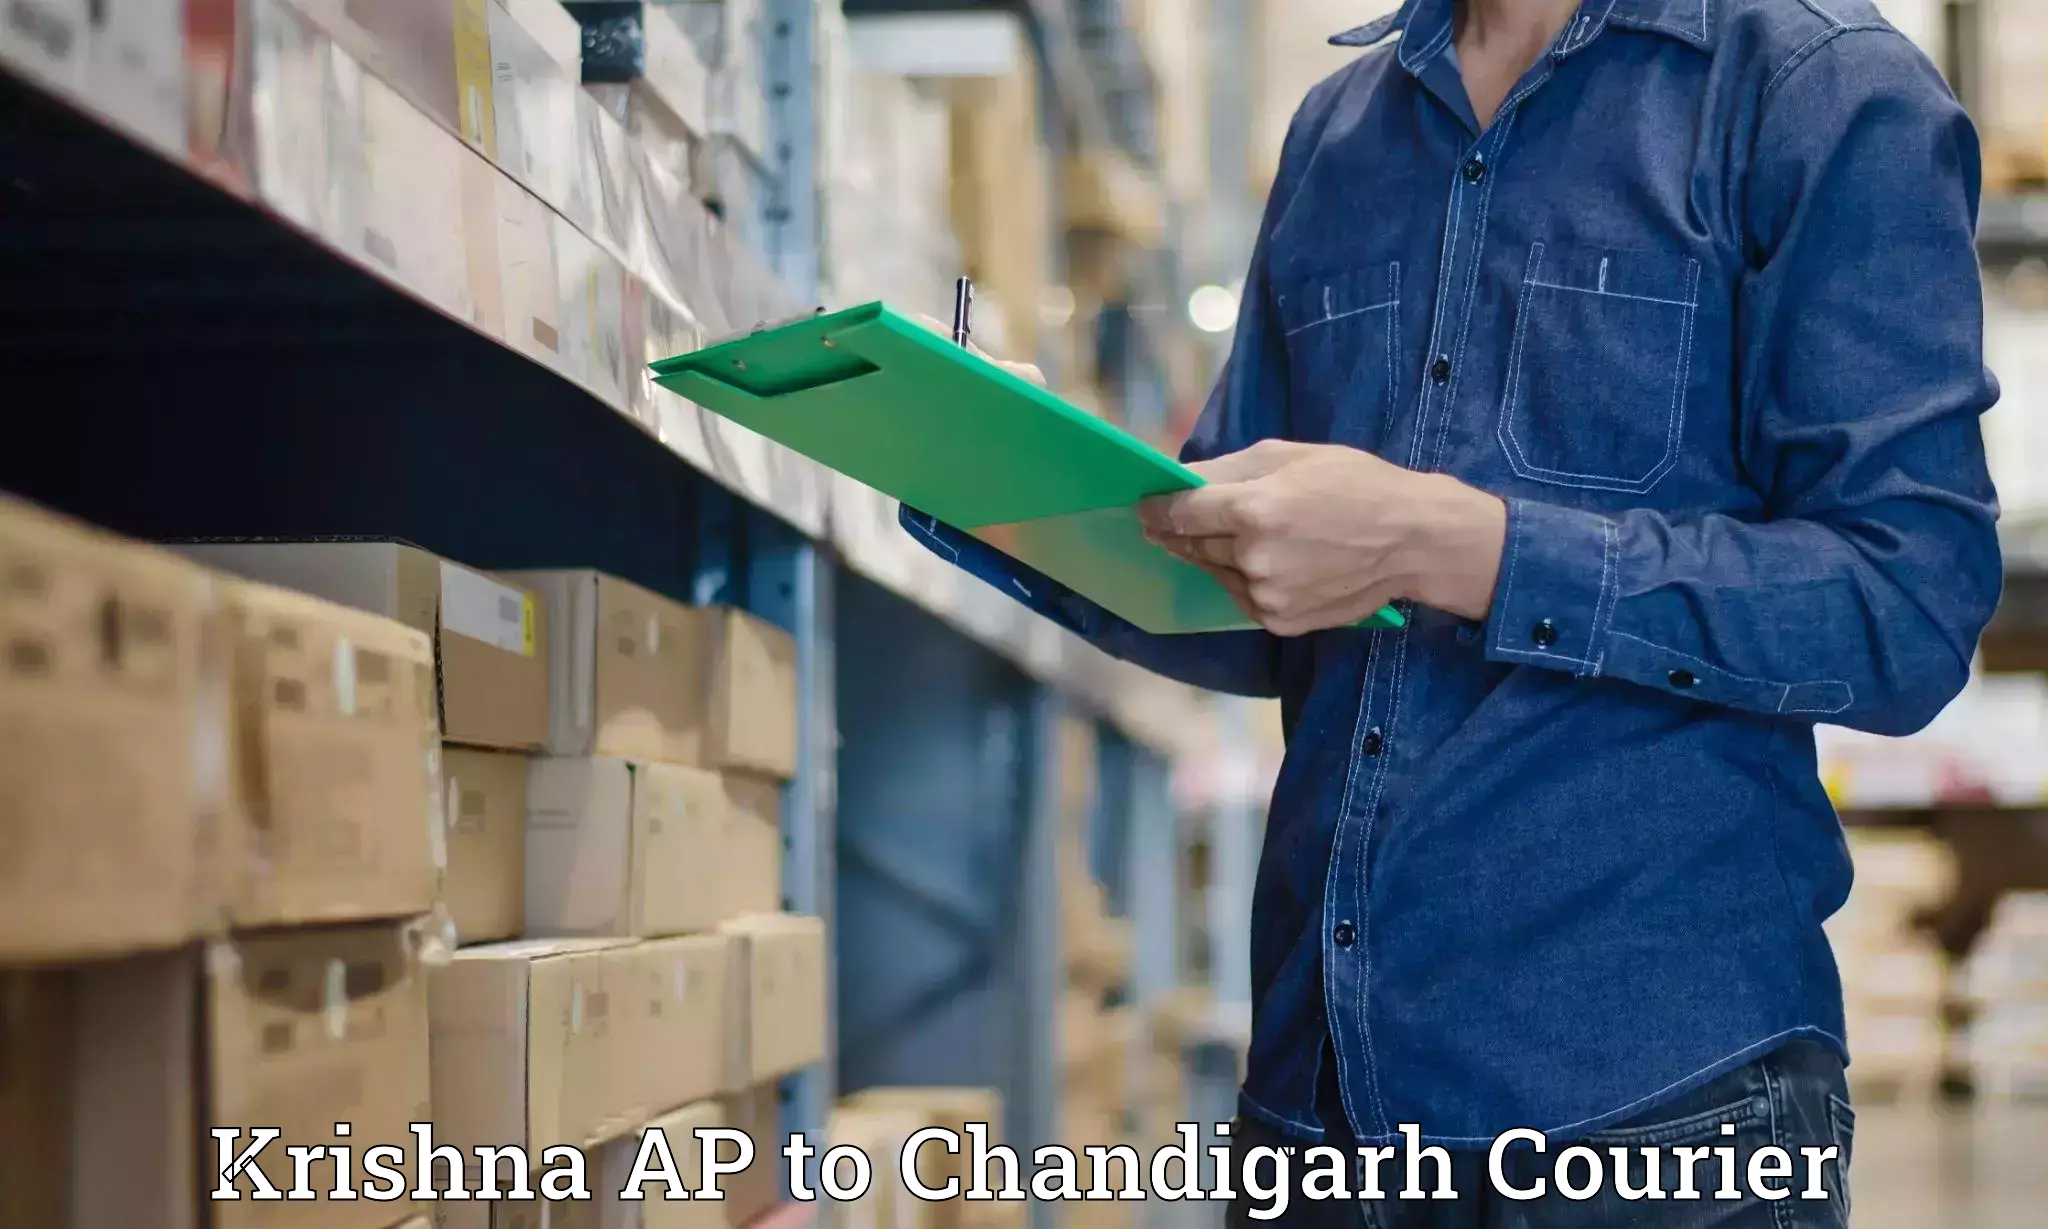 Expedited parcel delivery Krishna AP to Chandigarh